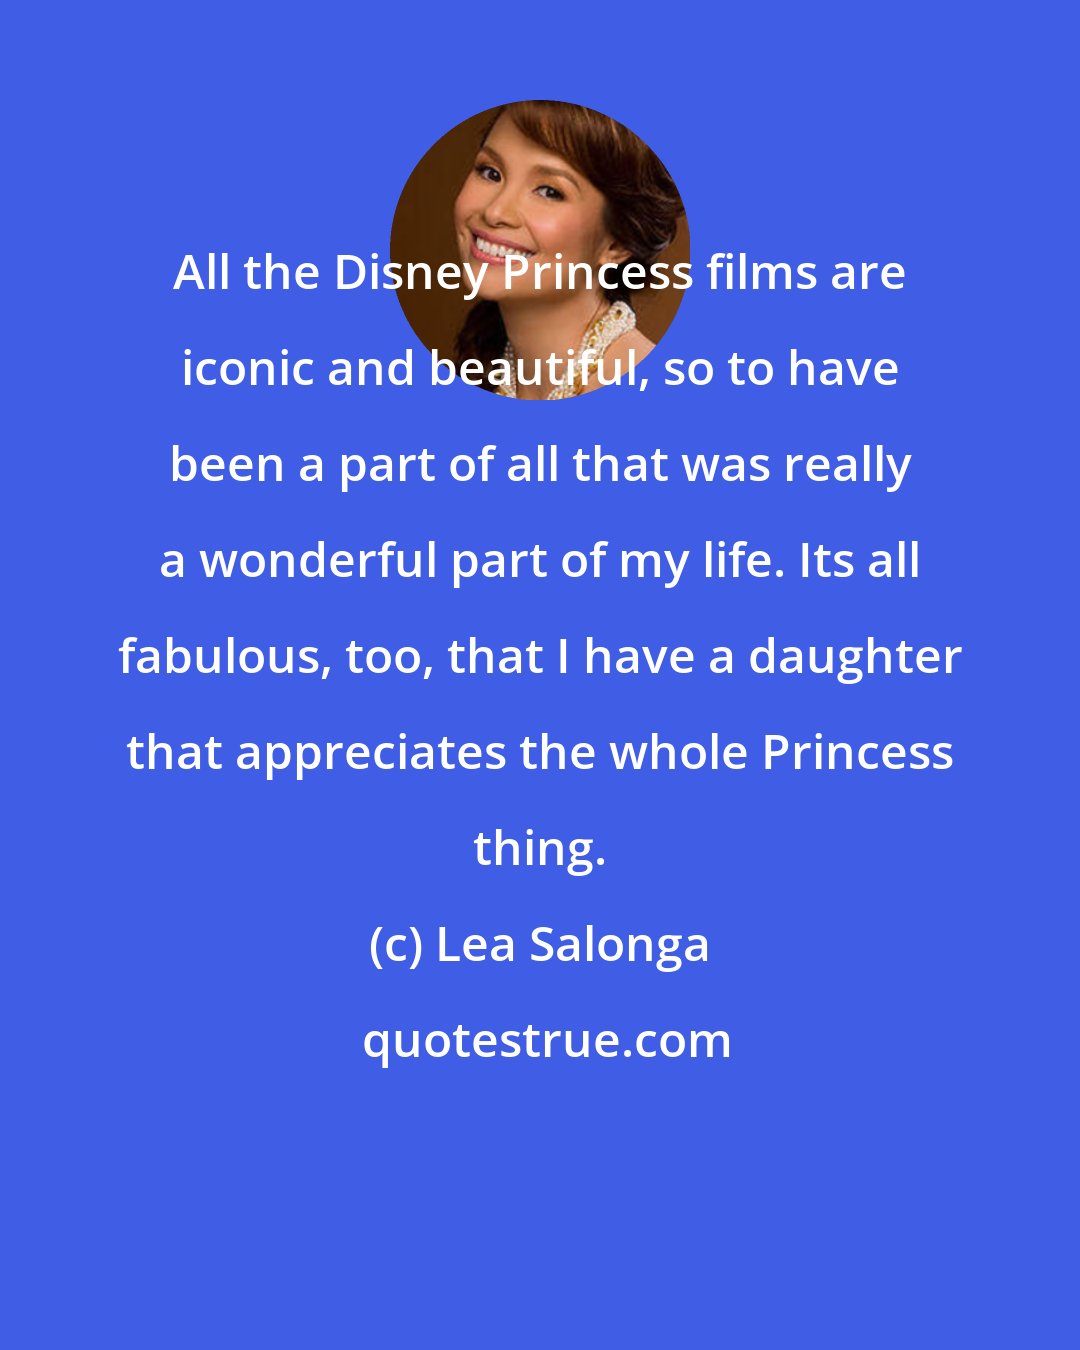 Lea Salonga: All the Disney Princess films are iconic and beautiful, so to have been a part of all that was really a wonderful part of my life. Its all fabulous, too, that I have a daughter that appreciates the whole Princess thing.